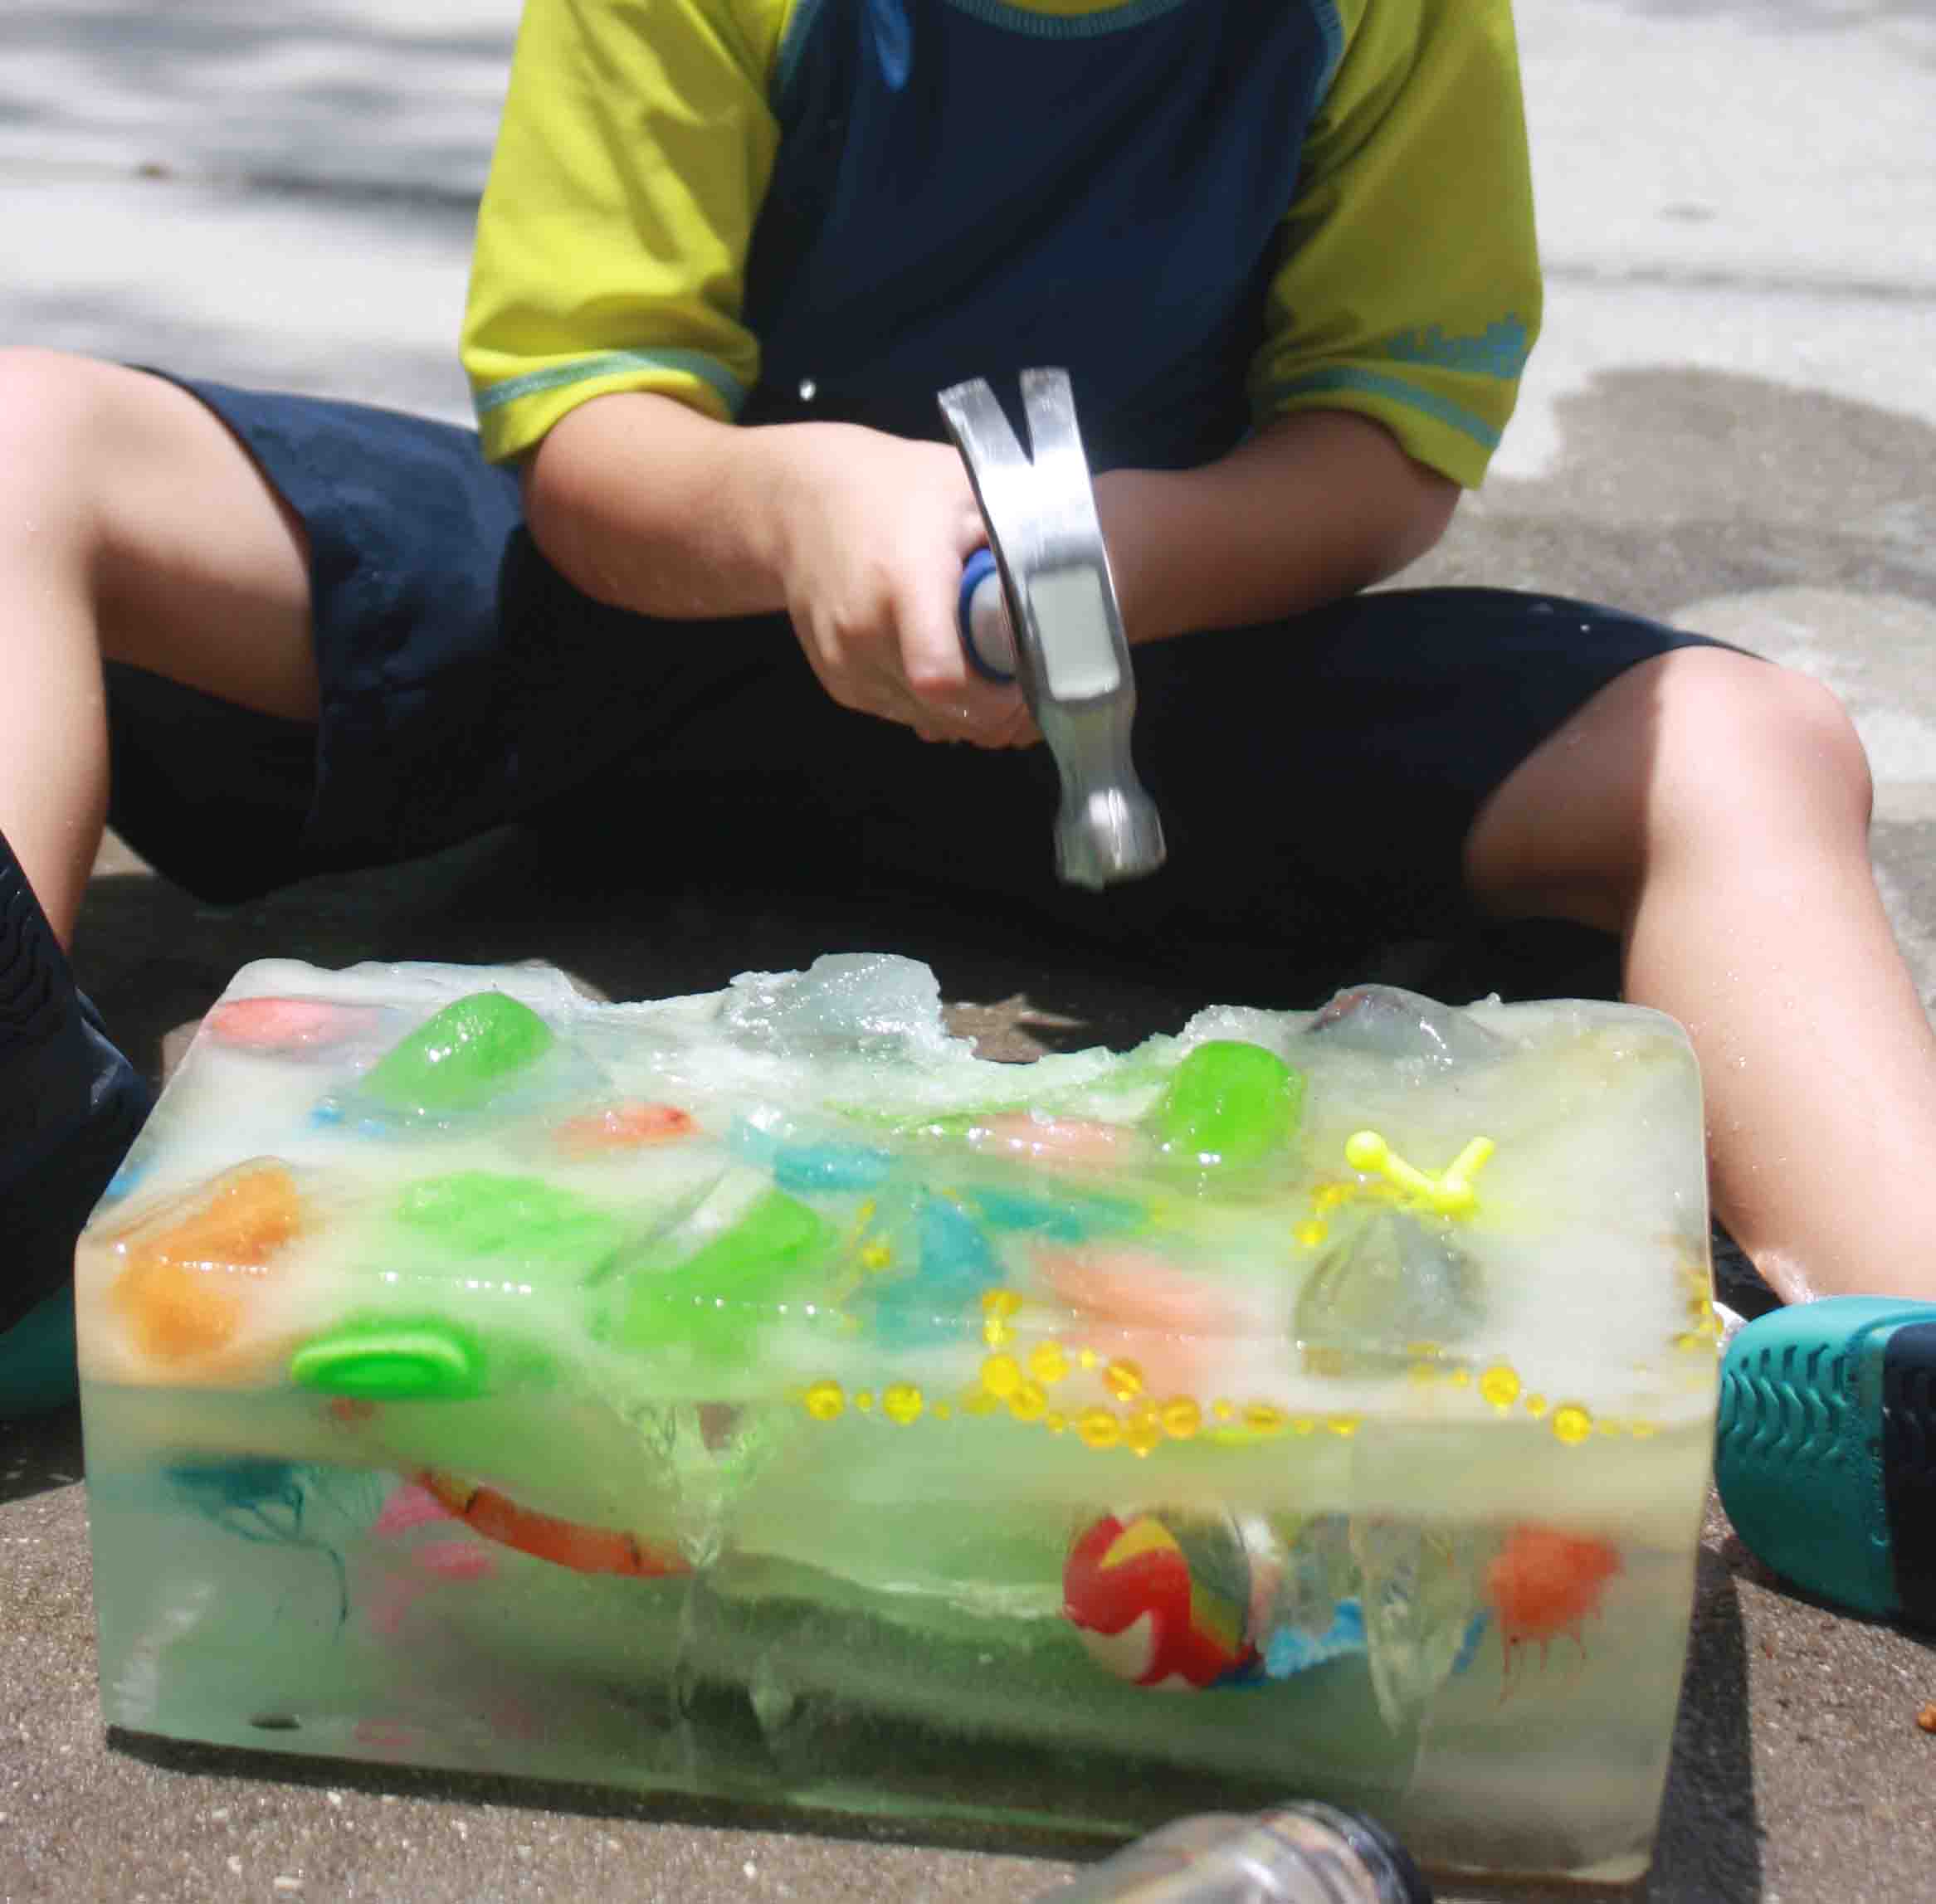 Keep them busy in the summer with this DIY ice block idea